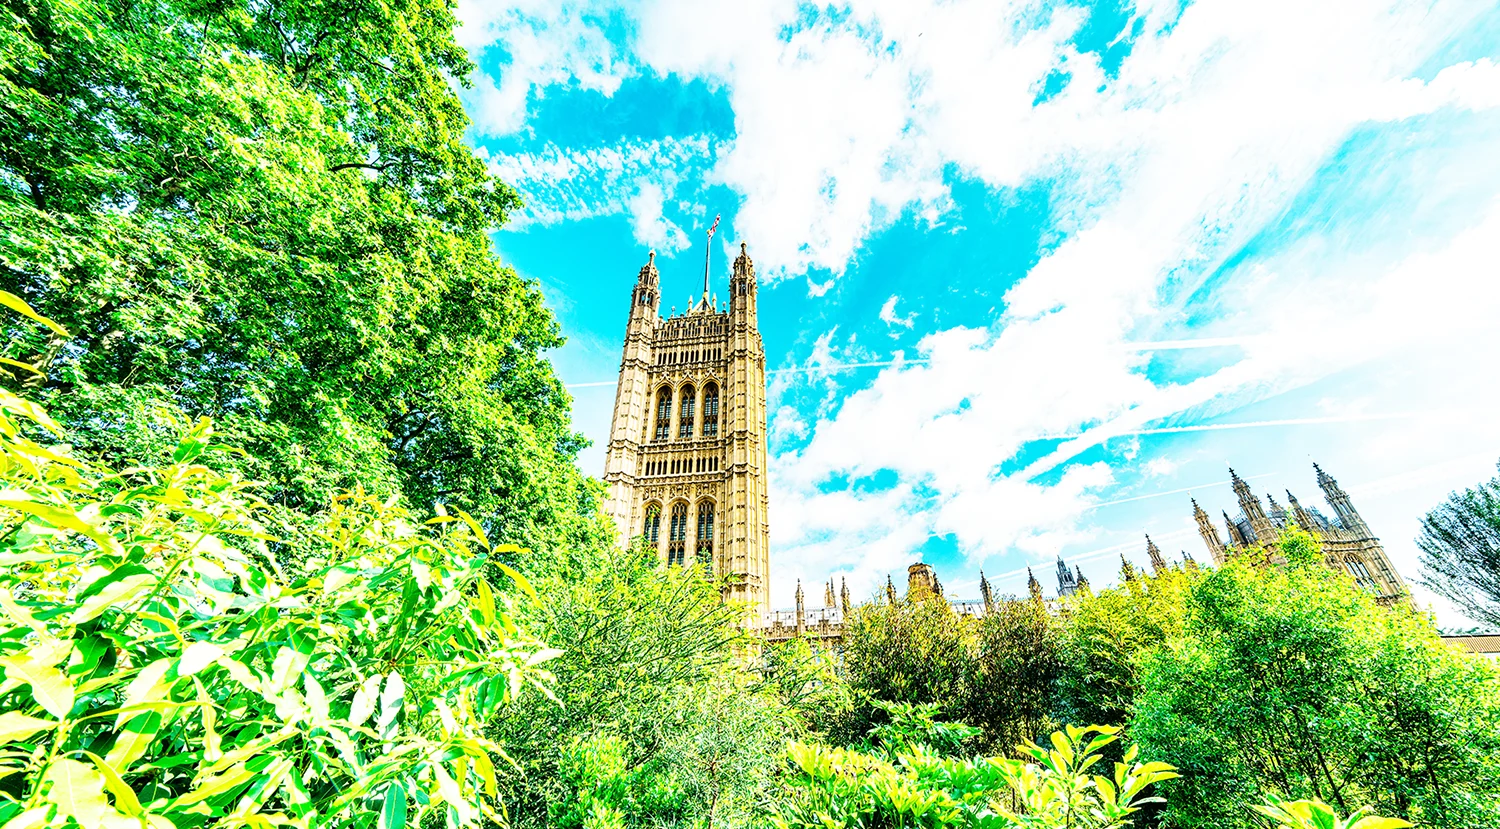 The tower the Houses of Parliament behind a wall of lush green vegetation against a blue sky streaked with clouds.